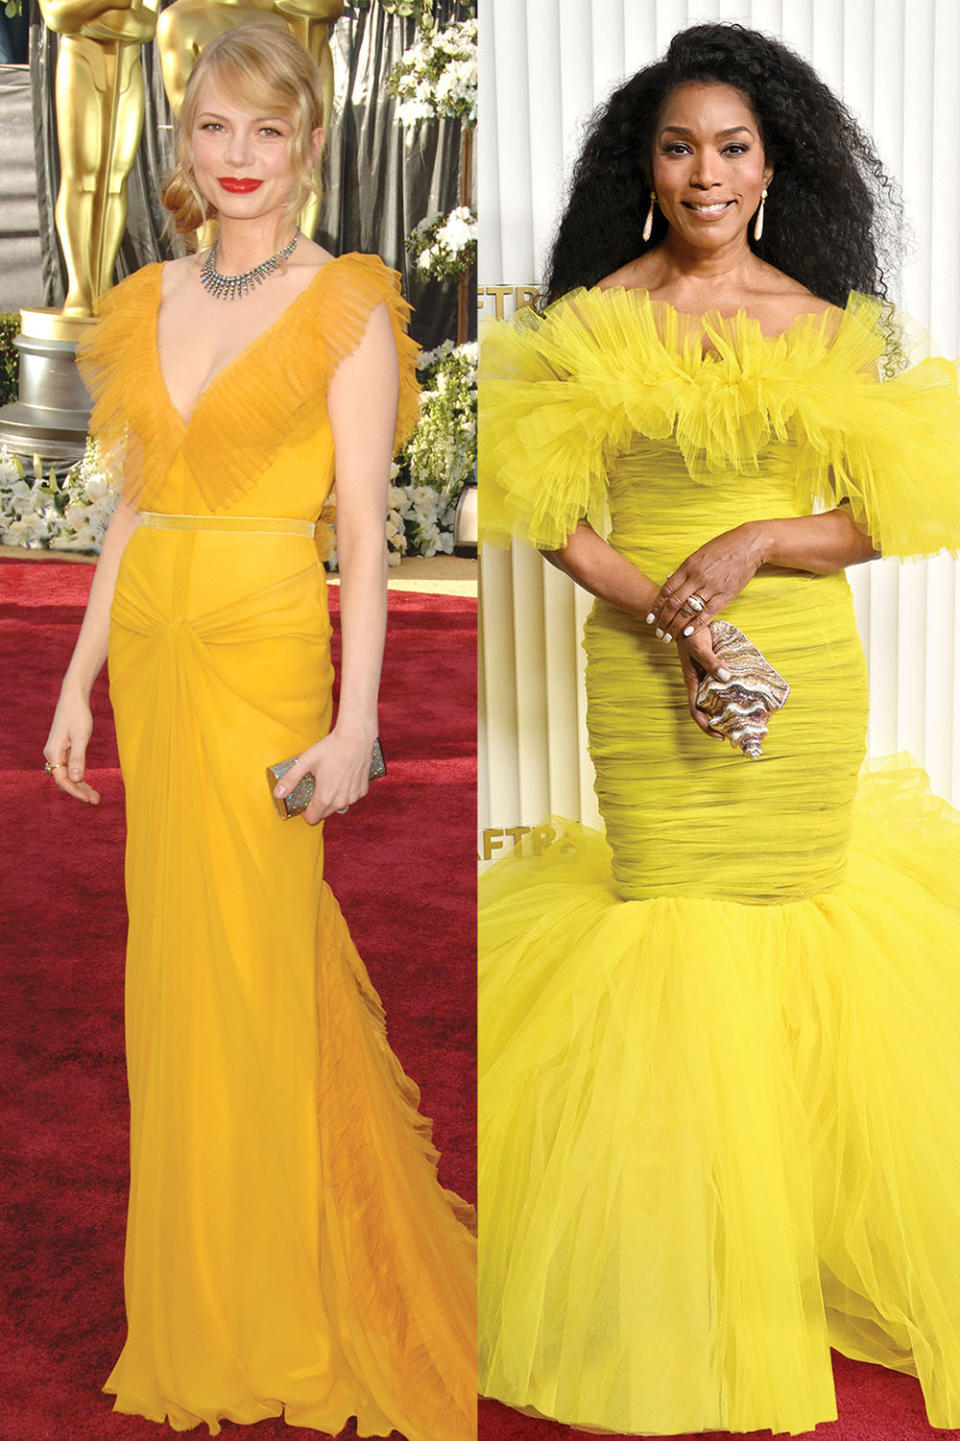 Michelle Williams at the 2006 Oscars in Vera Wang. Right: Angela Bassett at the 2023 SAG Awards in Giambattista Valli Couture.